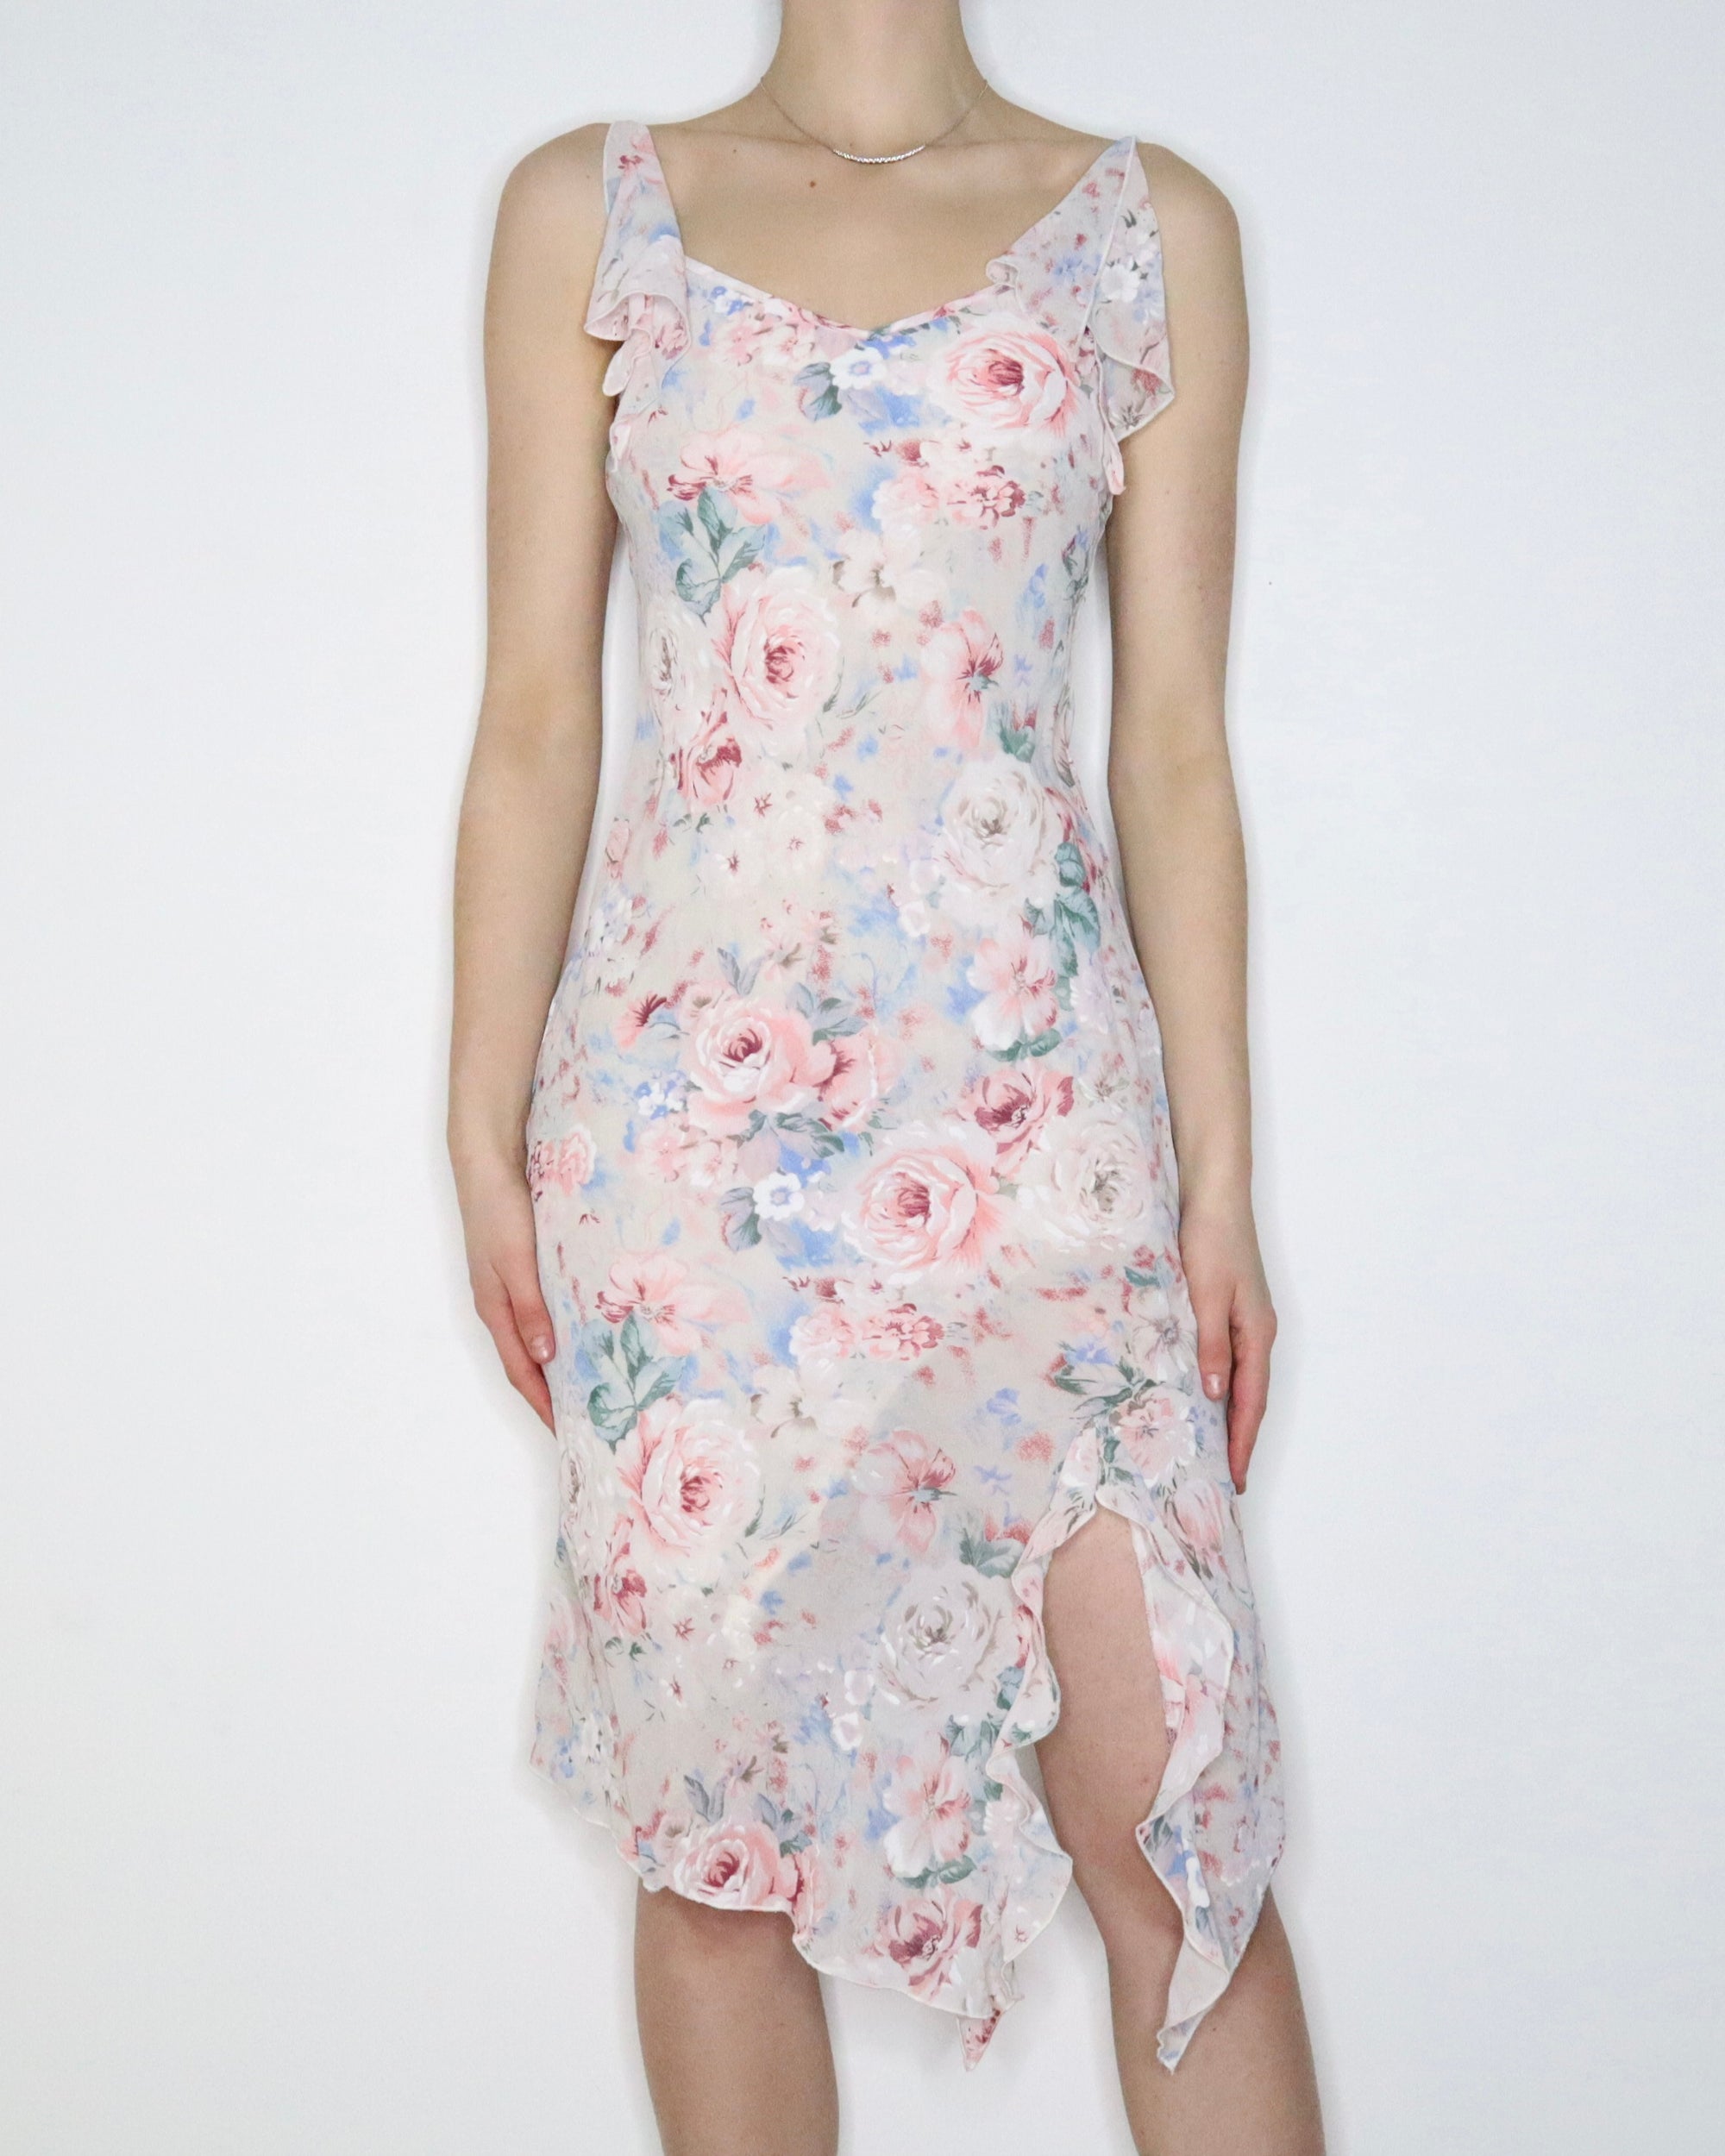 Pastel Floral Dress (Small) 